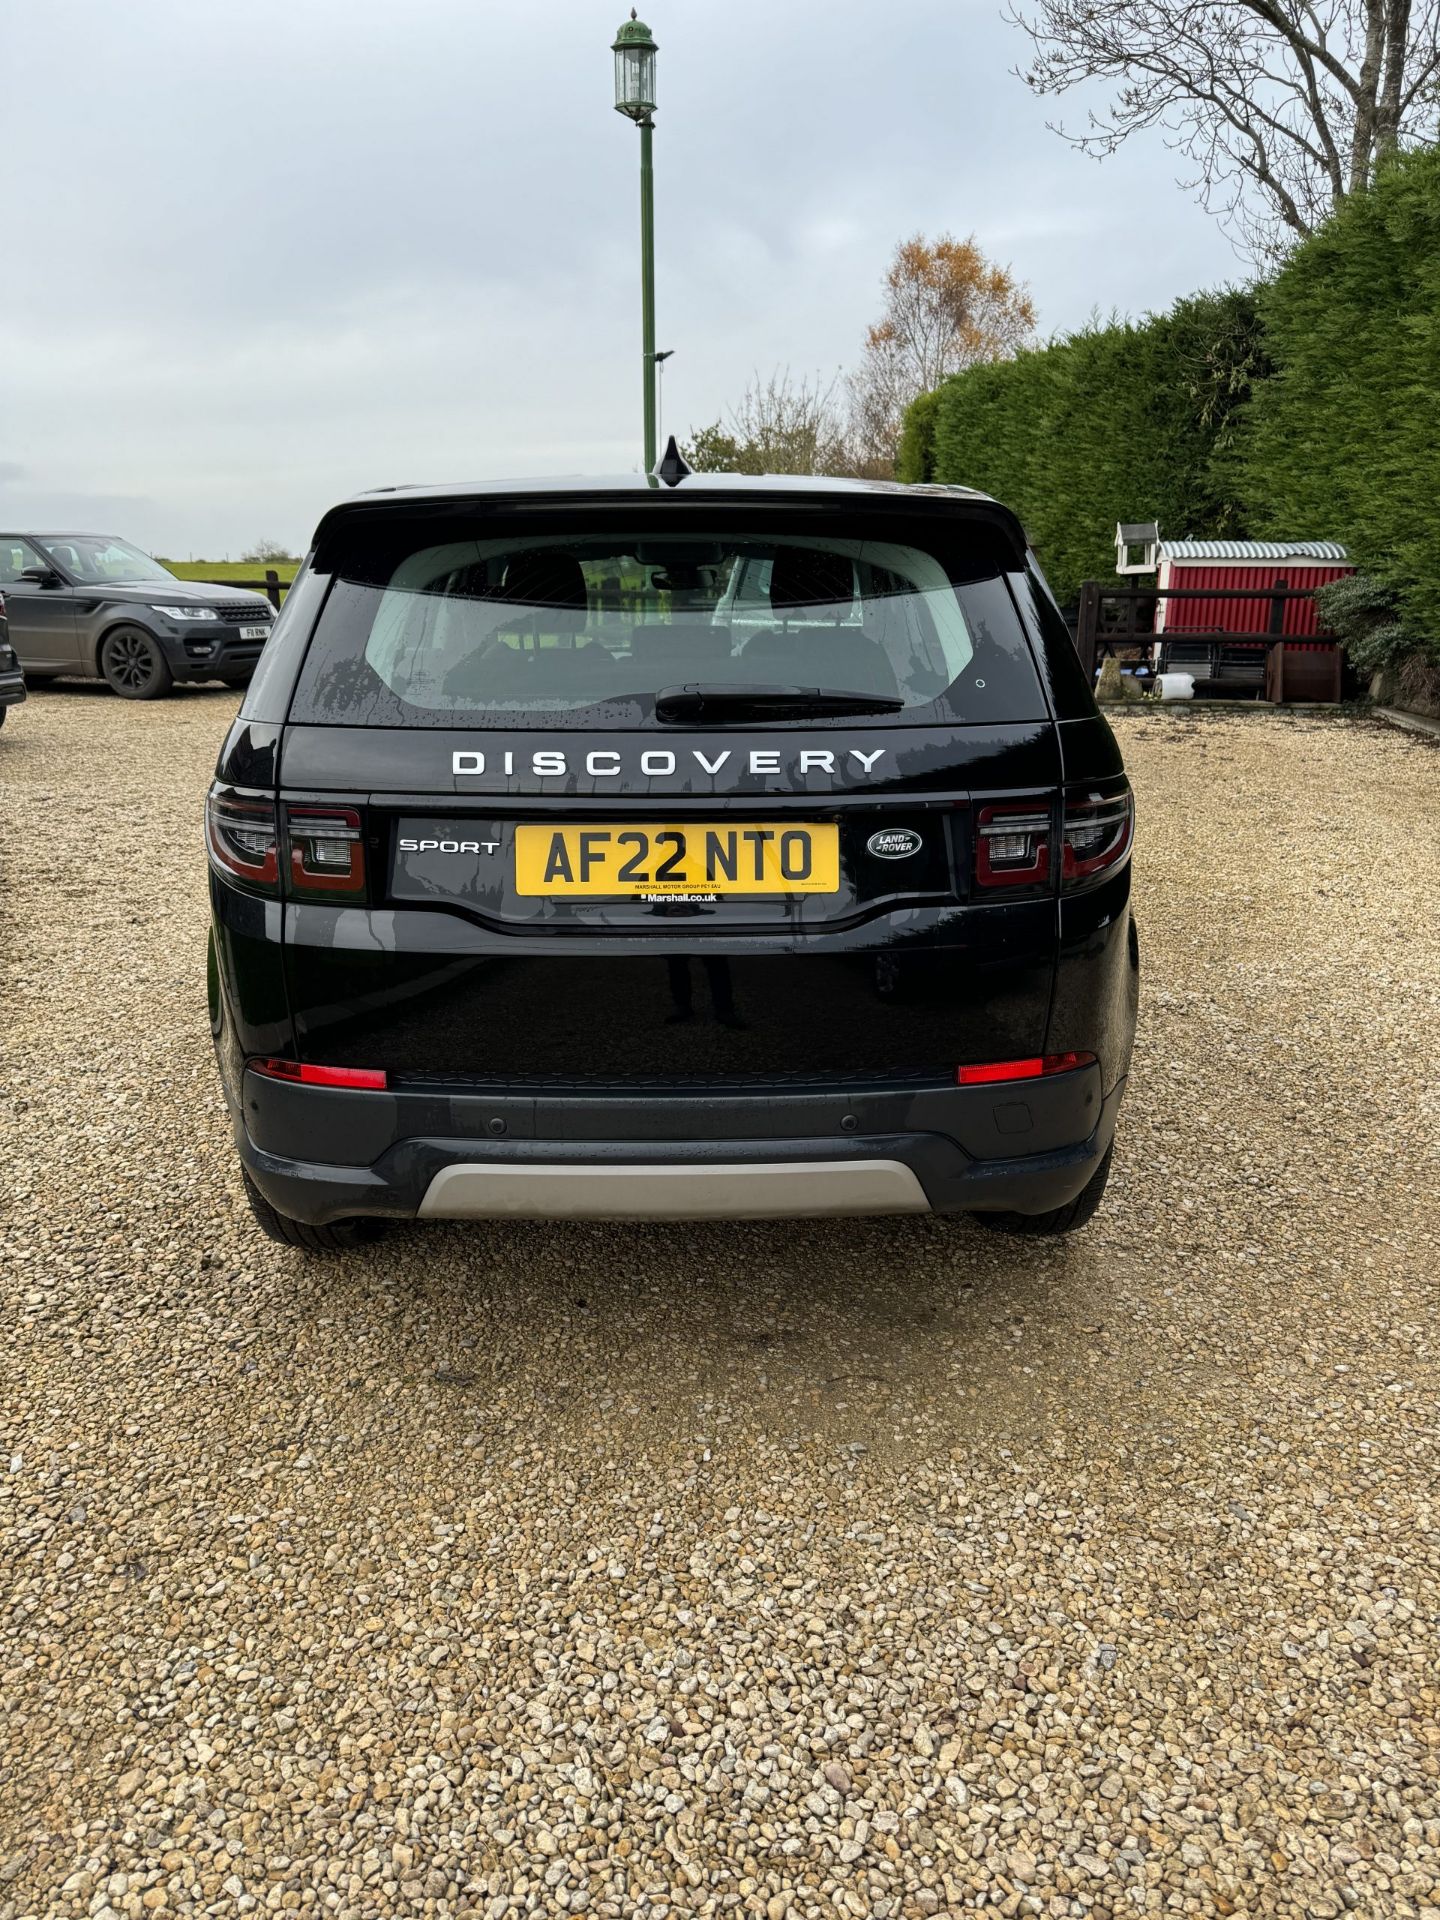 2022 LANDROVER DISCOVERY SPORT - Image 3 of 9